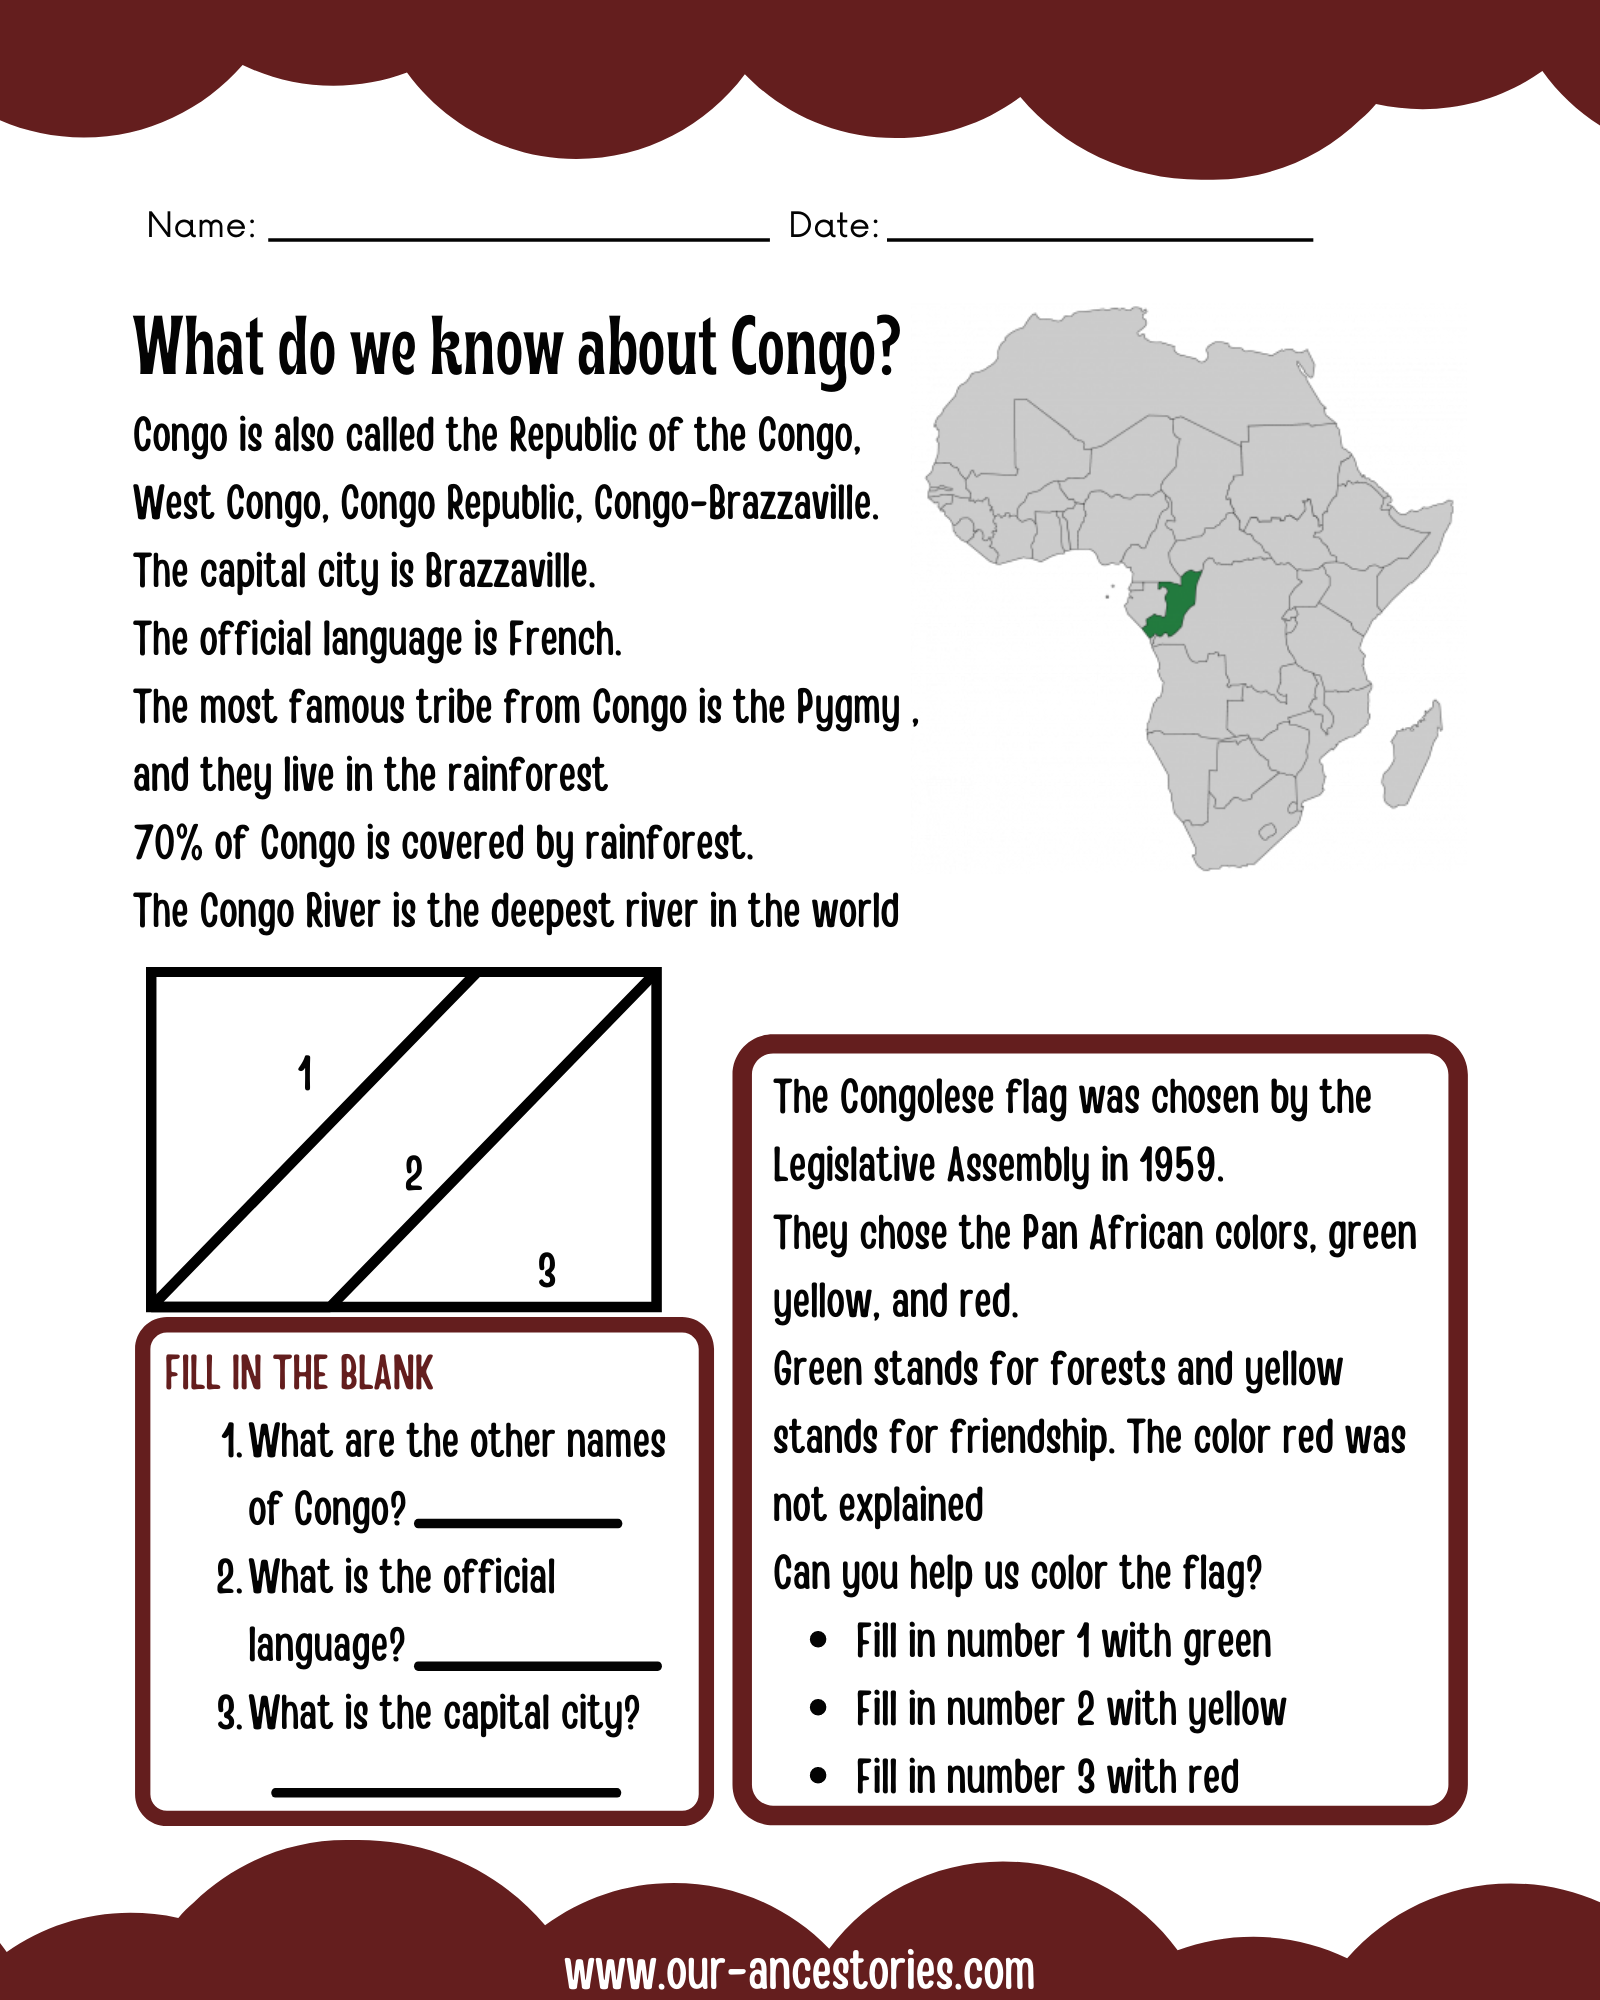 Our Ancestories - Congo Country Profile - Free Worksheets